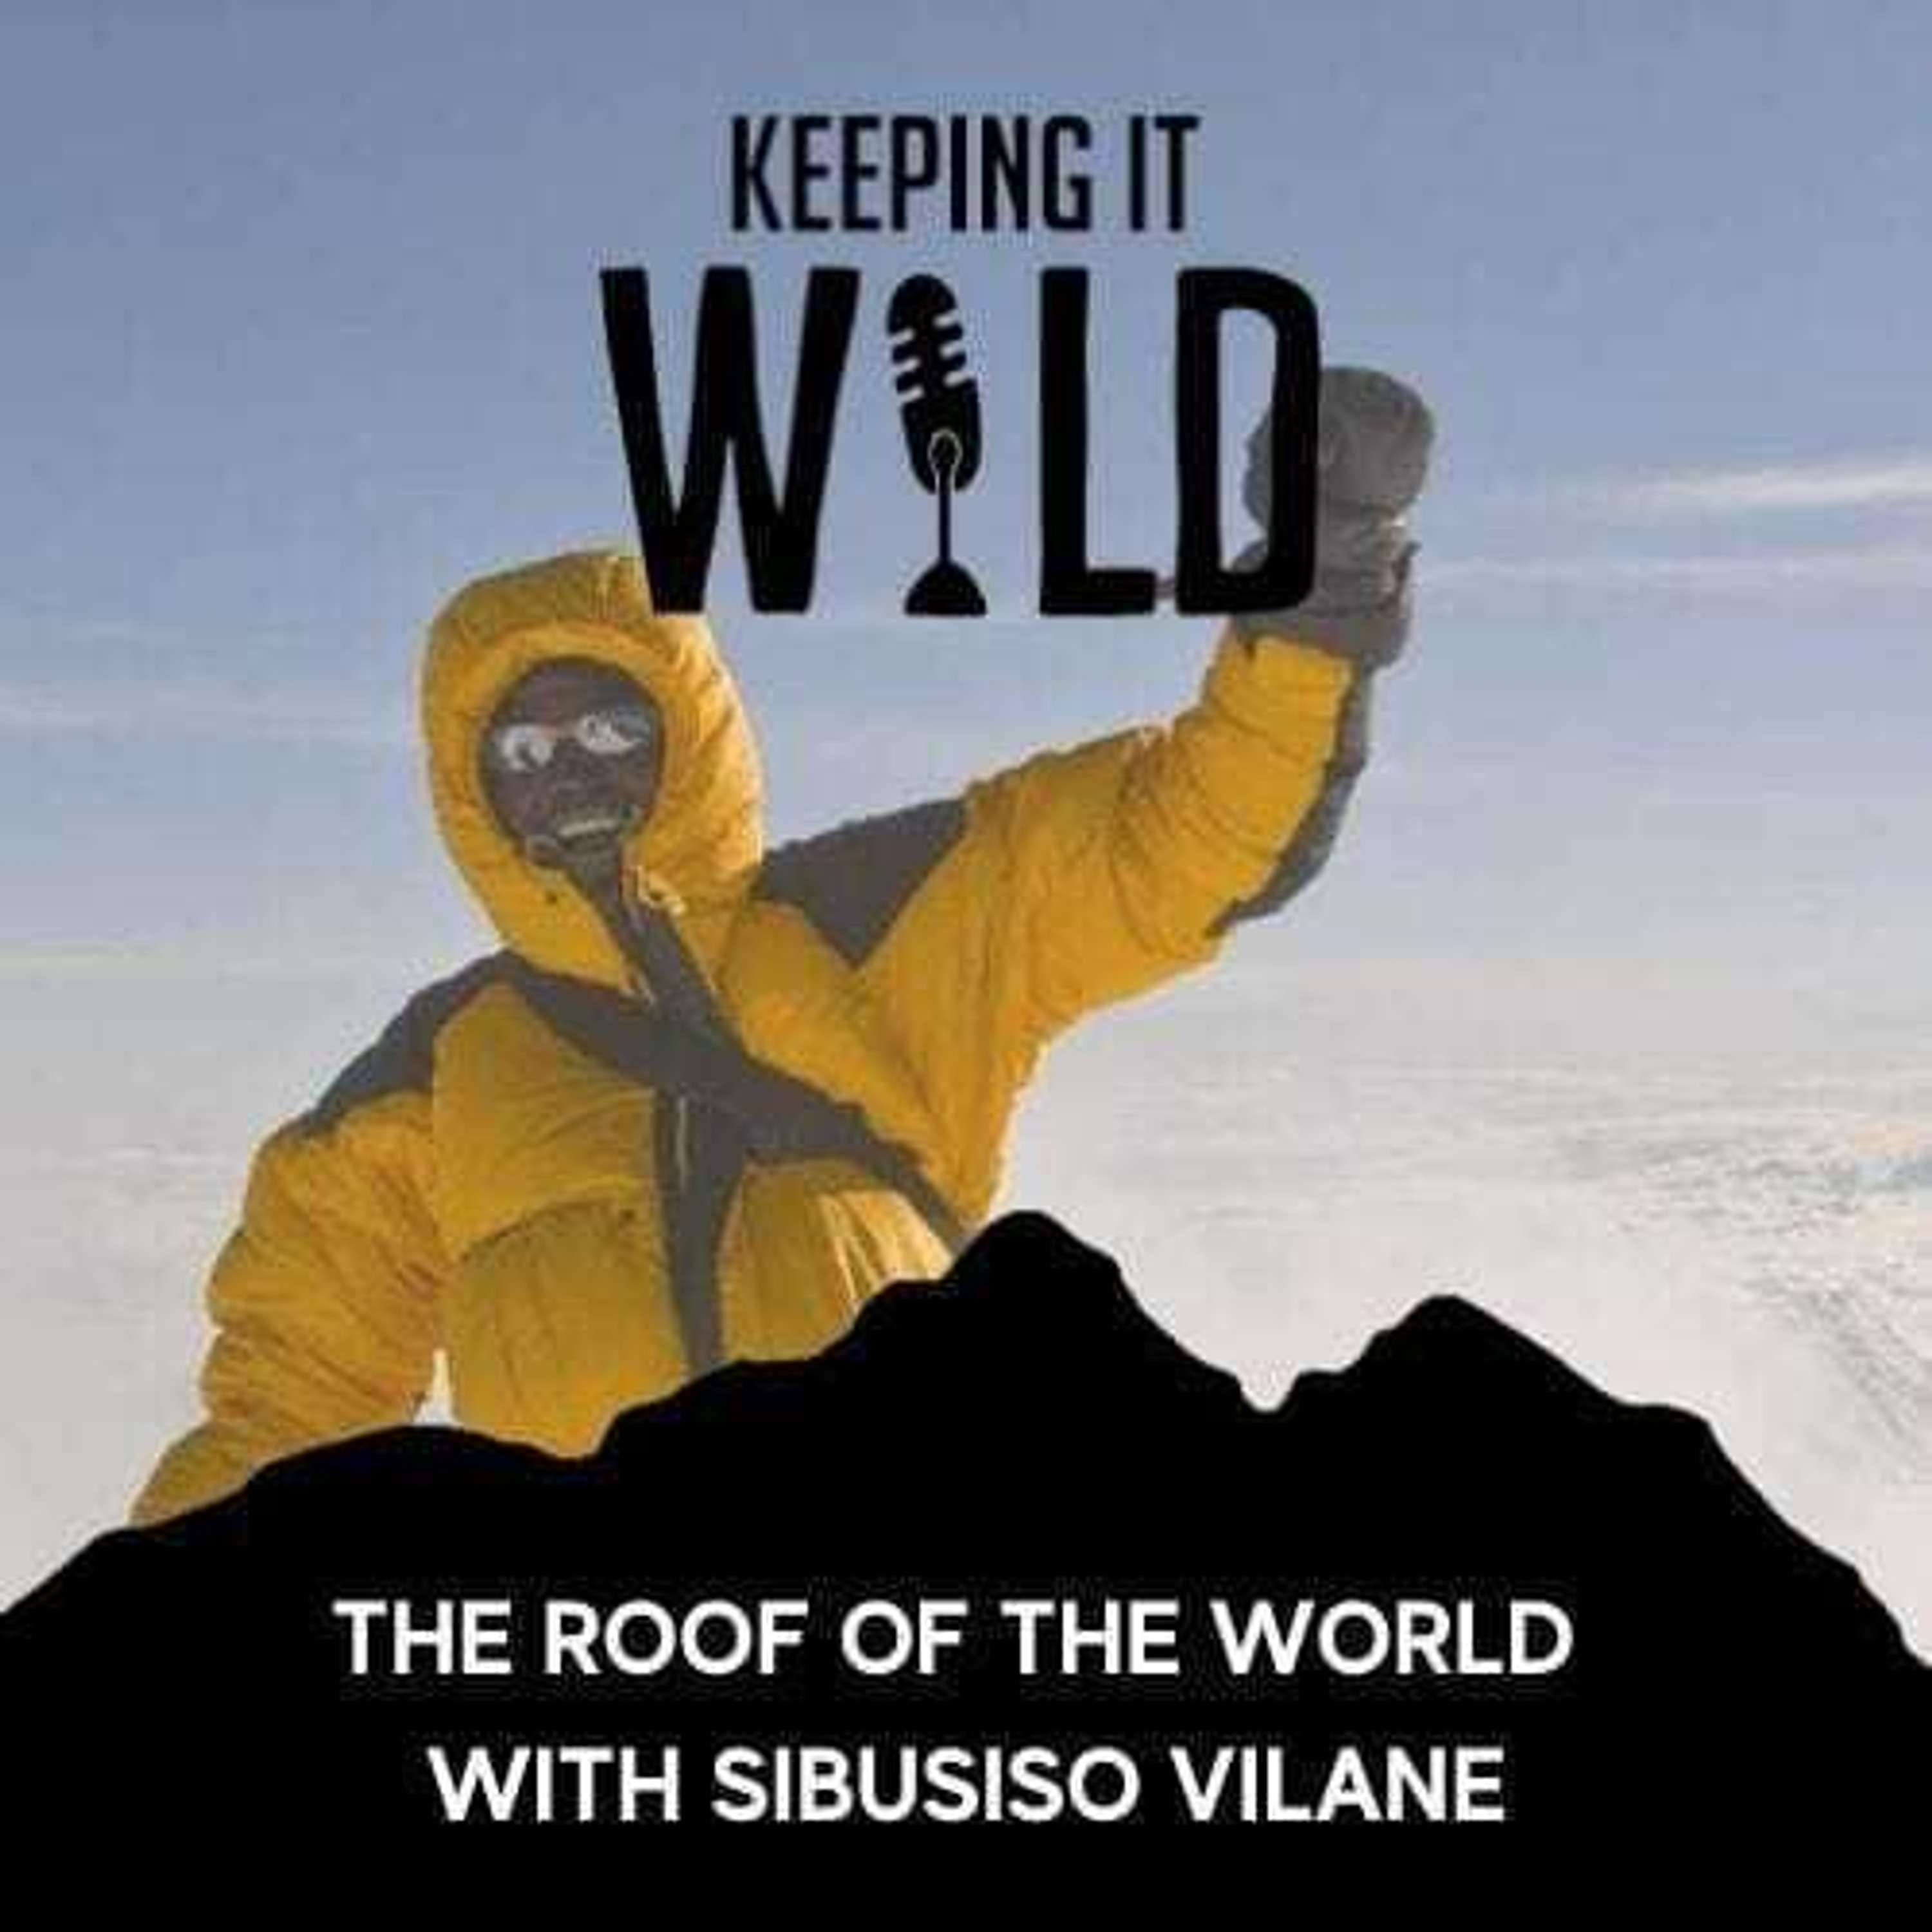 The Roof of the World with Sibusiso Vilane